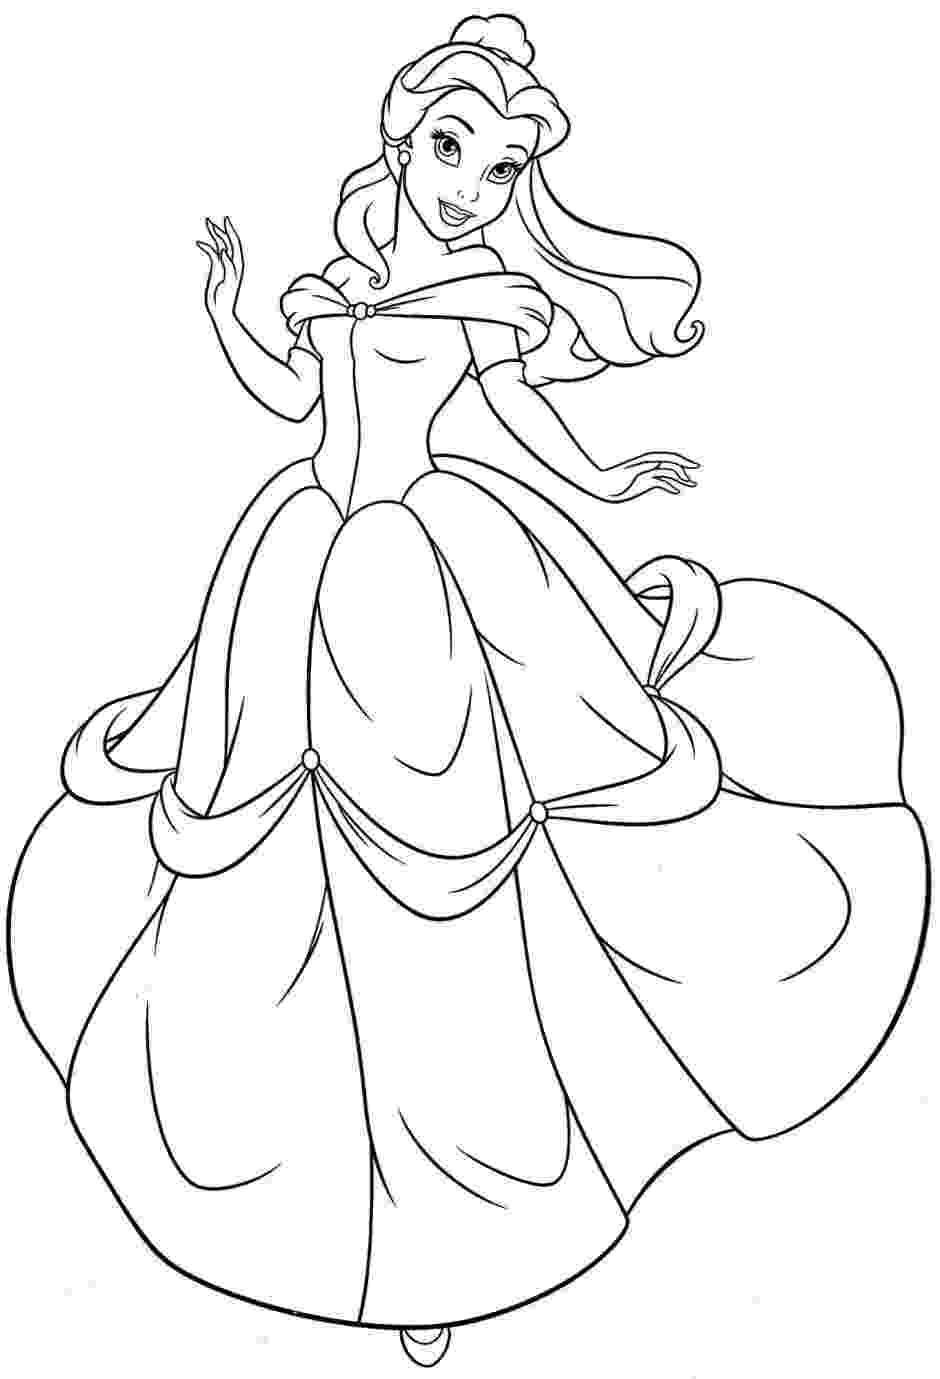 belle to color free printable belle coloring pages for kids belle to color 